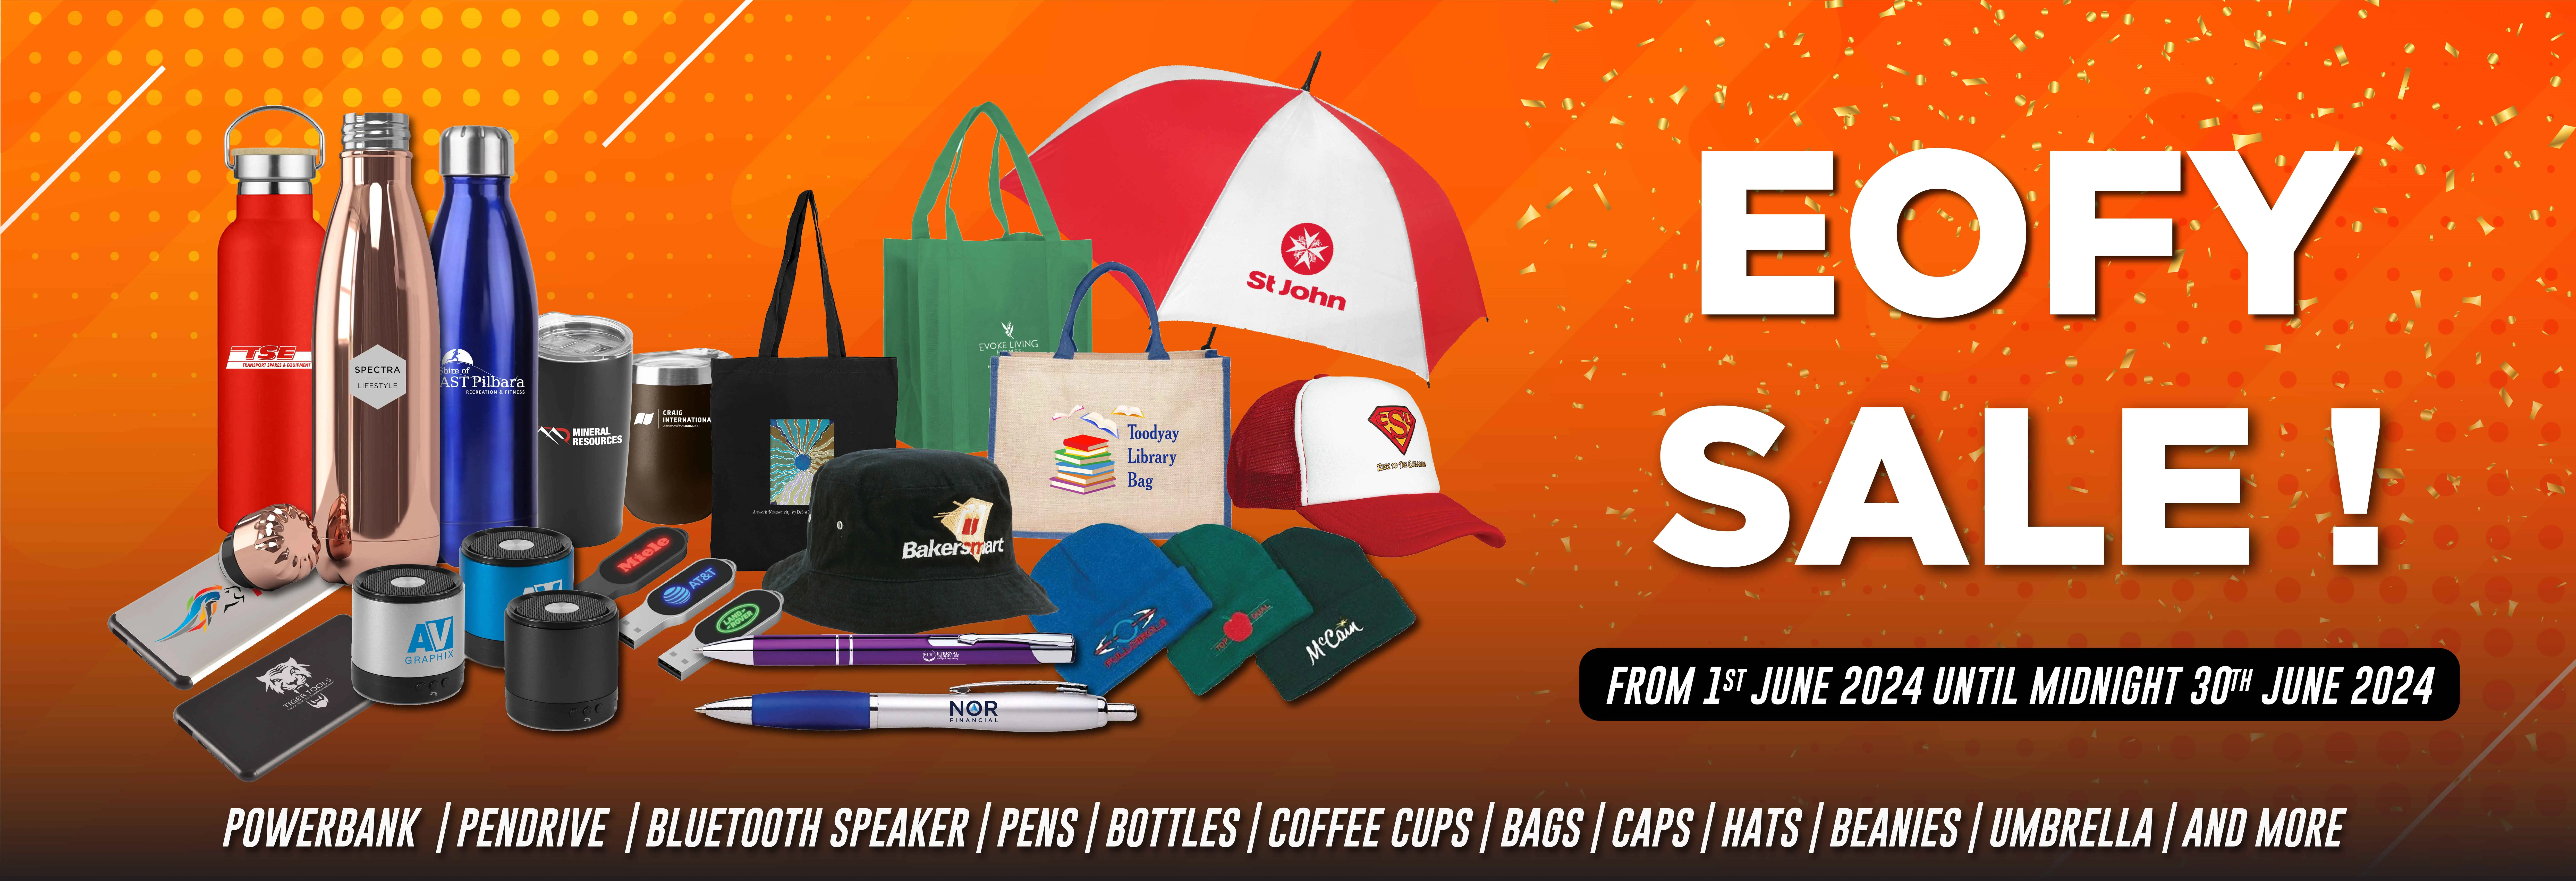 promotional-products-sale-offer-online-perth-australia -  Mad Dog Promotions